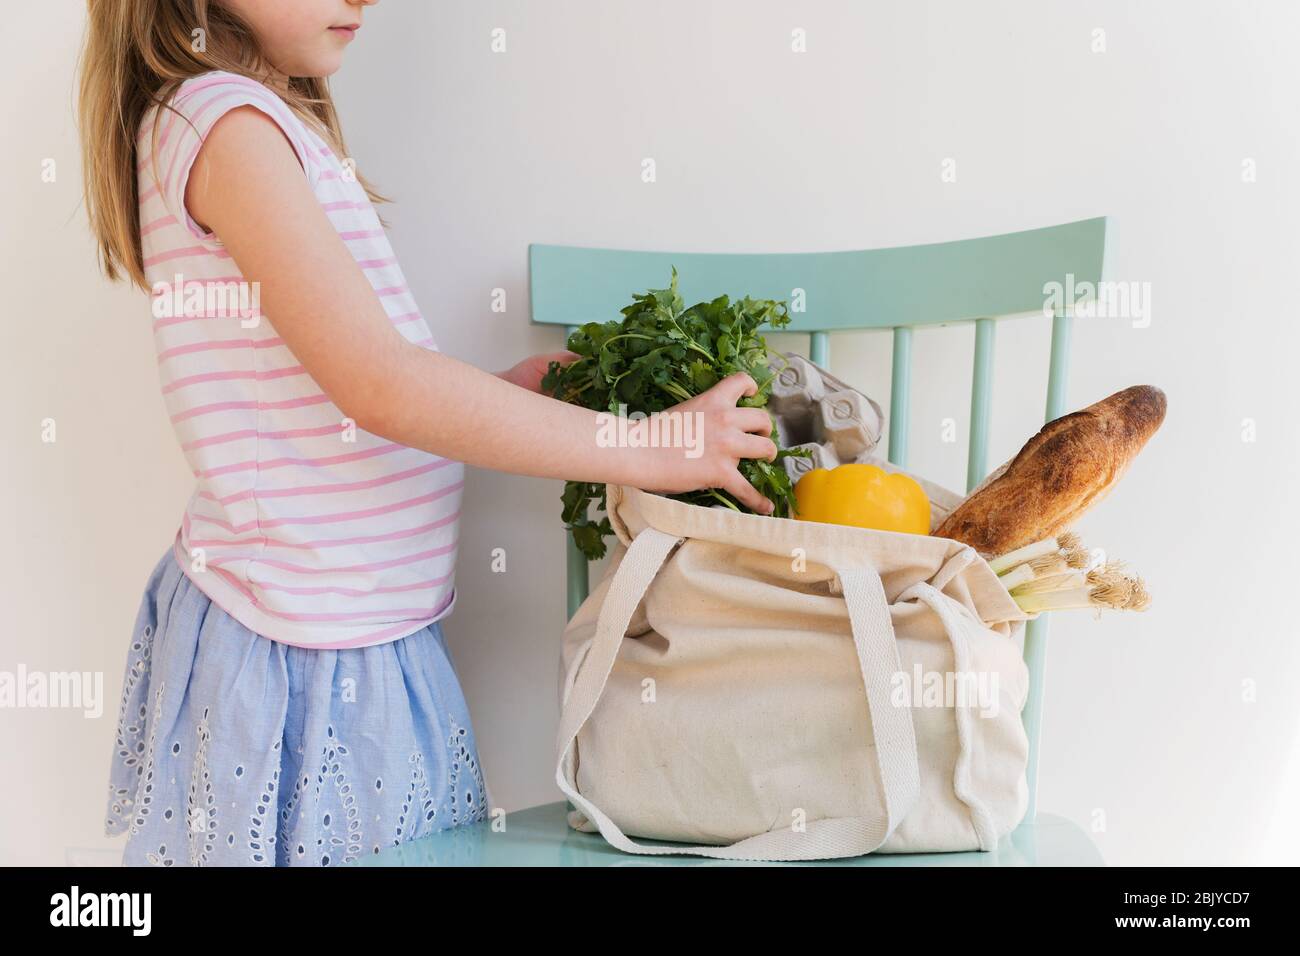 Girl unpacking products from reusable bag Stock Photo